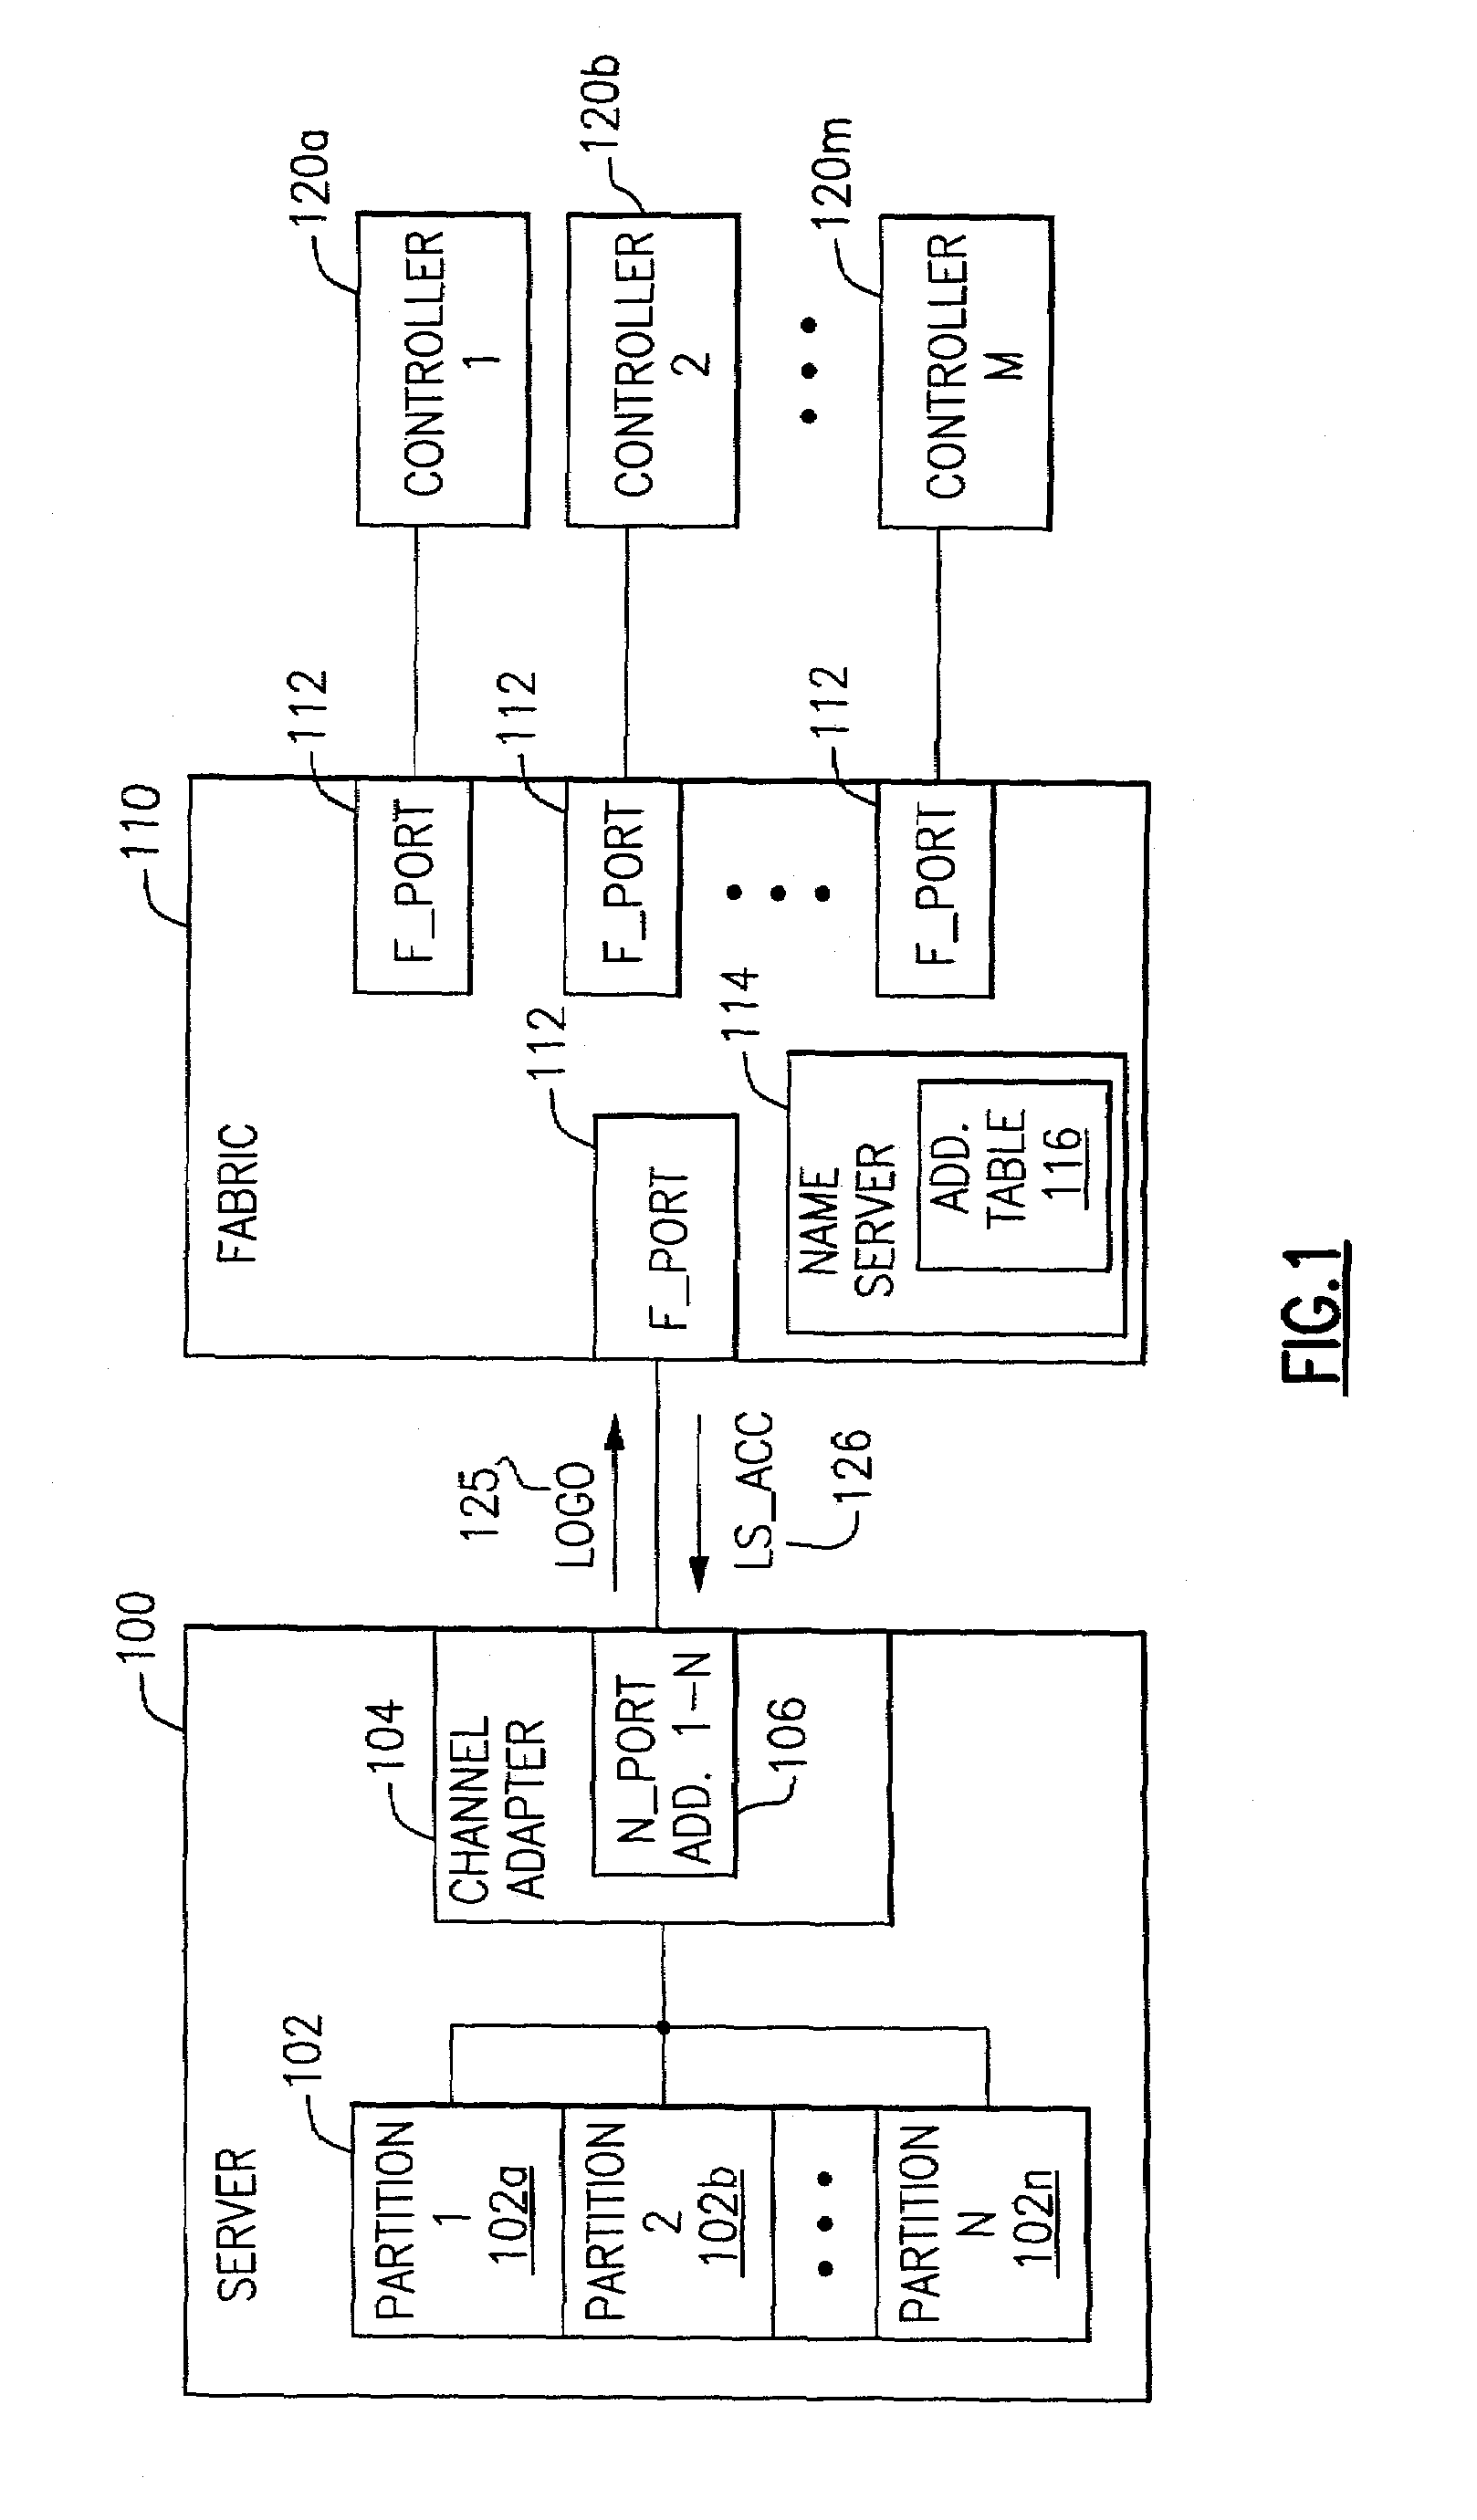 Method and apparatus for a non-disruptive recovery of a single partition in a multipartitioned data processing system